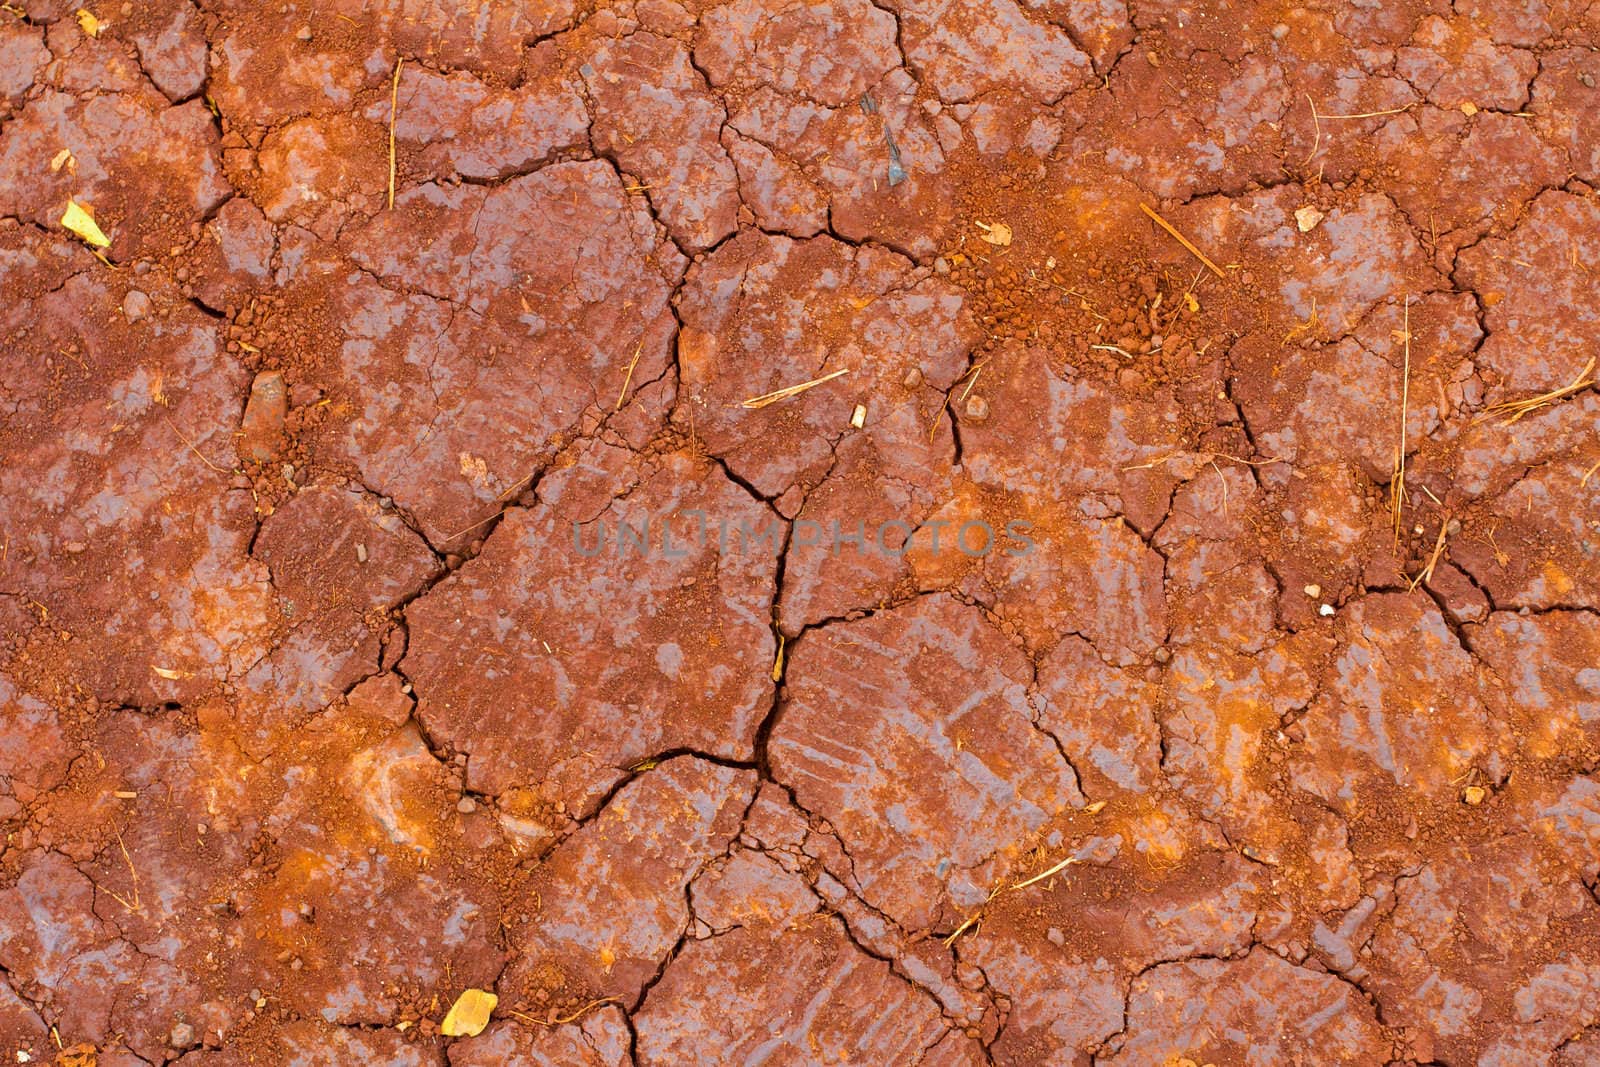 A drought has come across the land leaving everything dry and the dirt cracking. This is red lava rock dirt clay that hasn't seen water or liquid in a long time and is very dry.